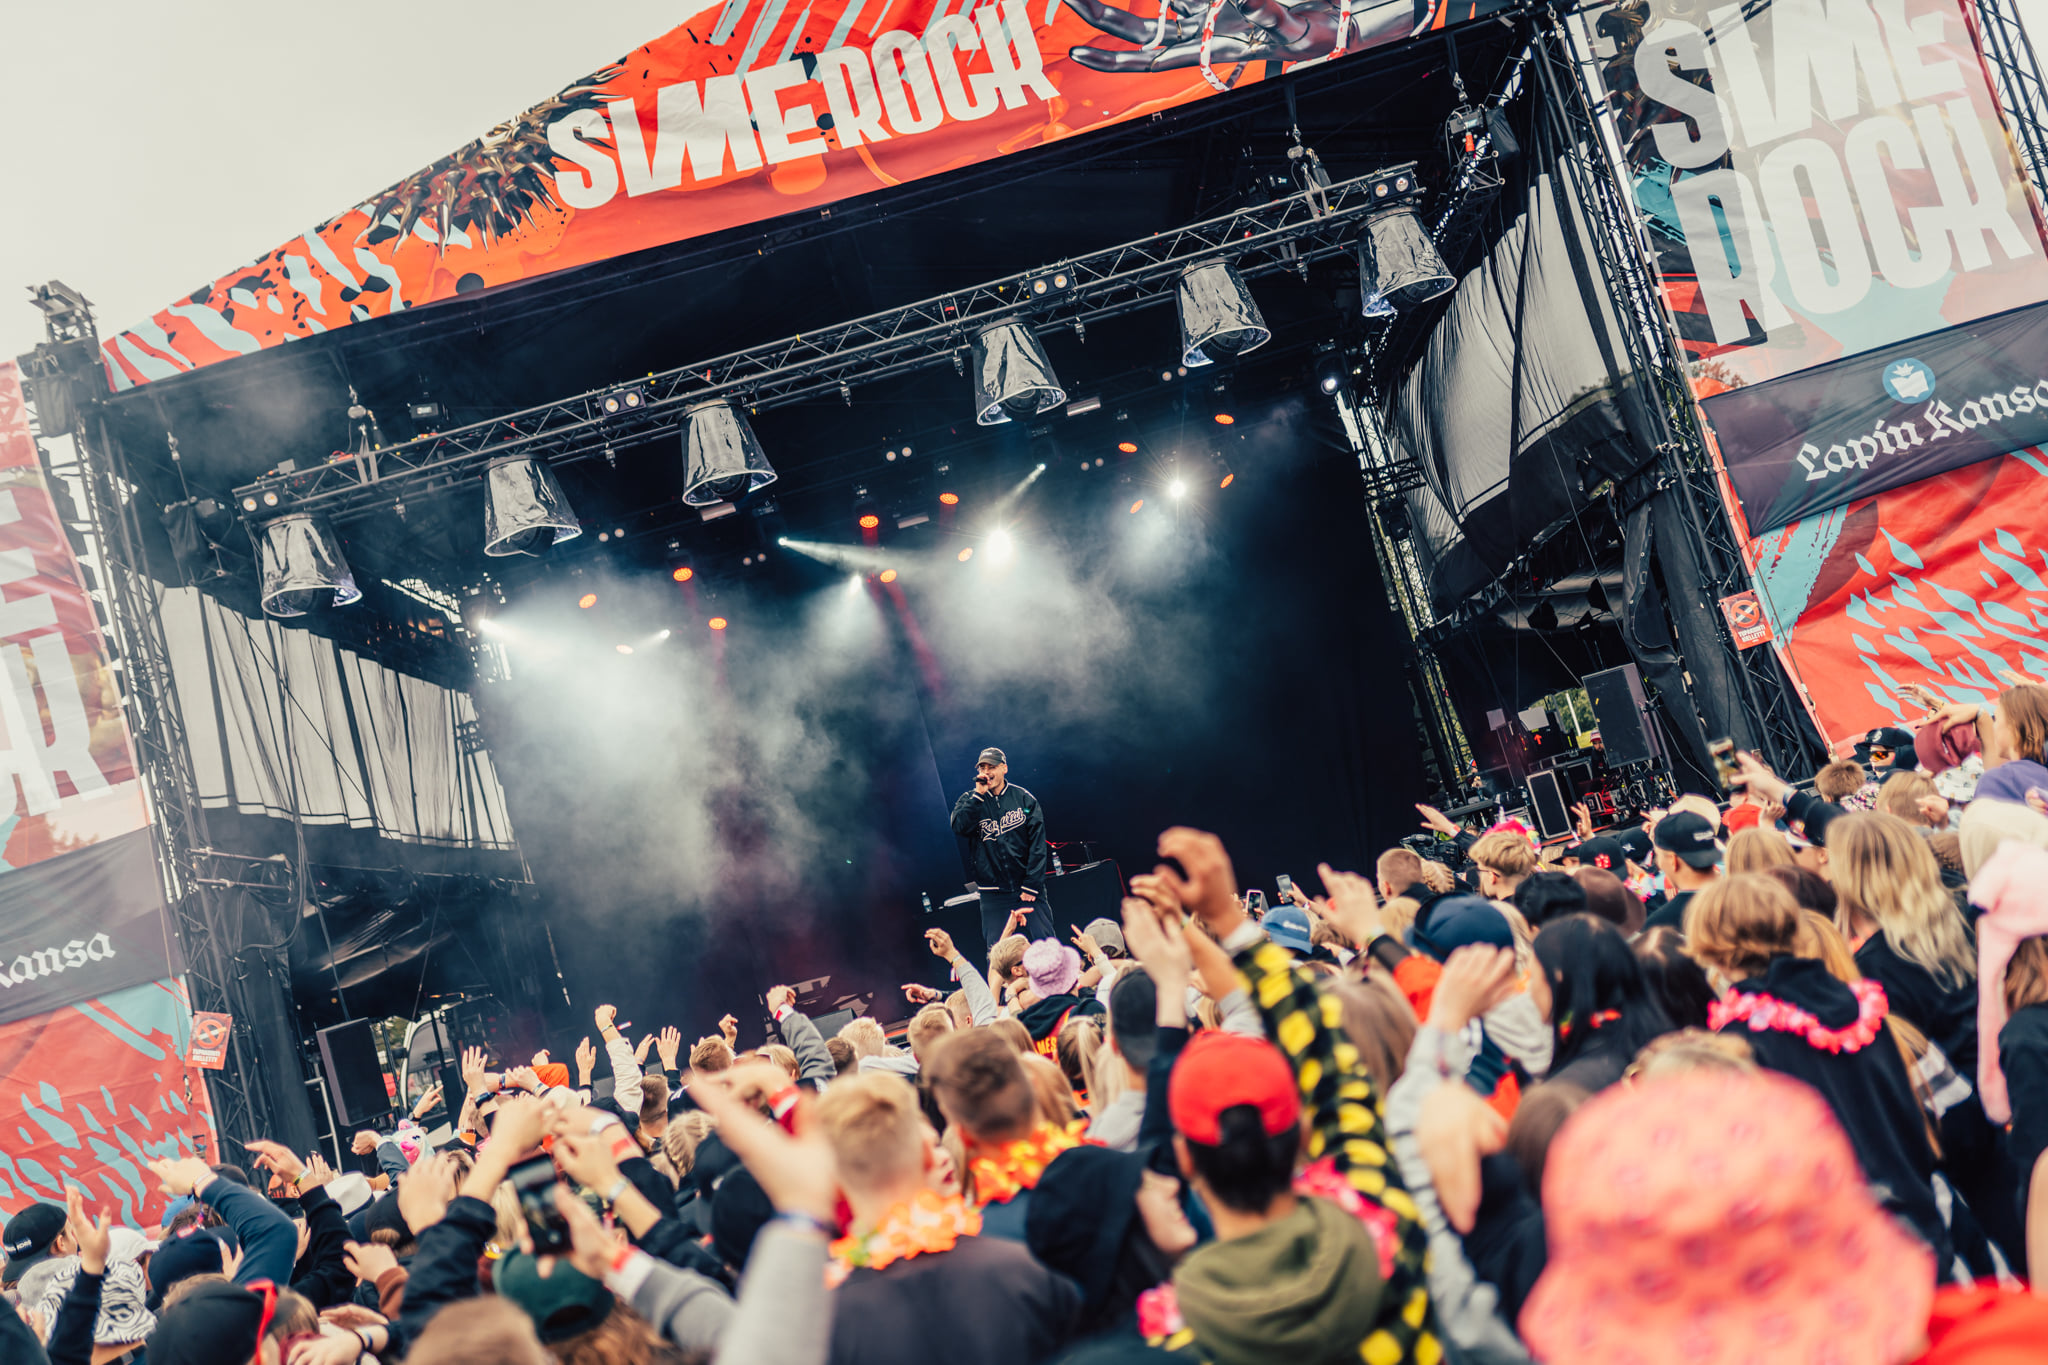 Sime rock summer festival in Rovaniemi. A crowd of people in the audience in front of a stage shot from behind. Many of them have their hands in the air. On the stage, there is a rapper performing.